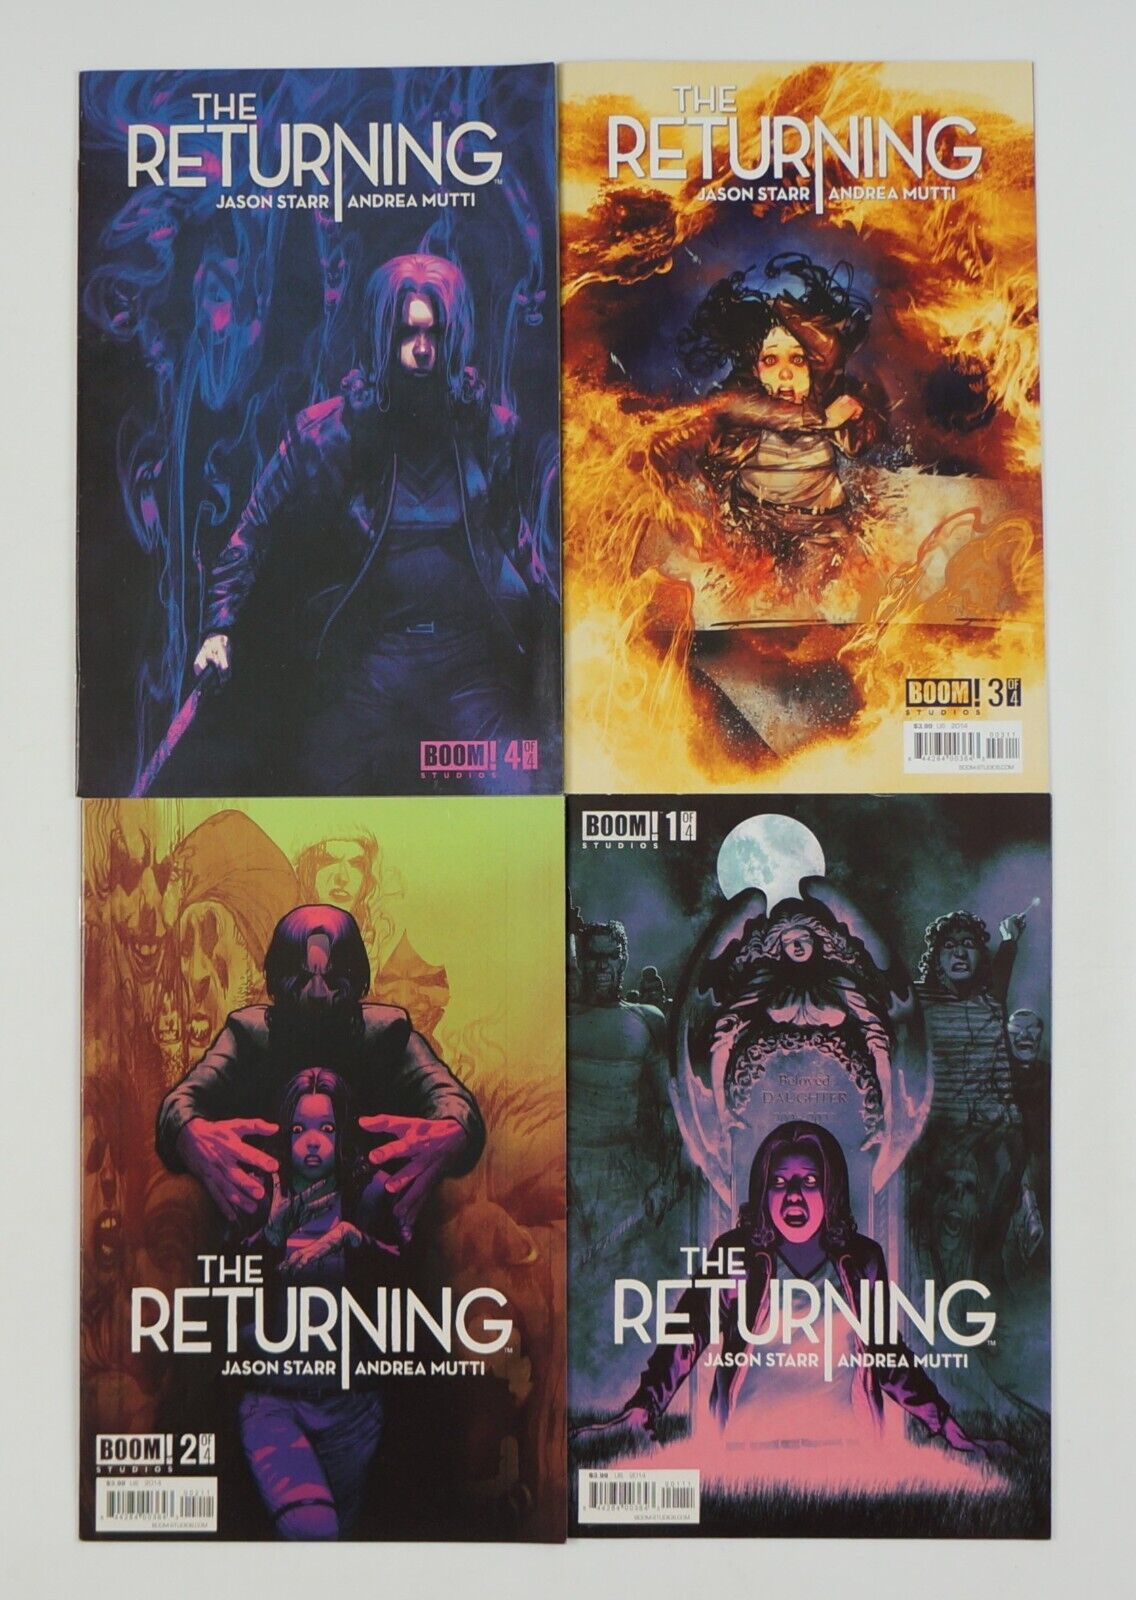 the Returning #1-4 VF/NM complete series - Jason Starr - near death experiences